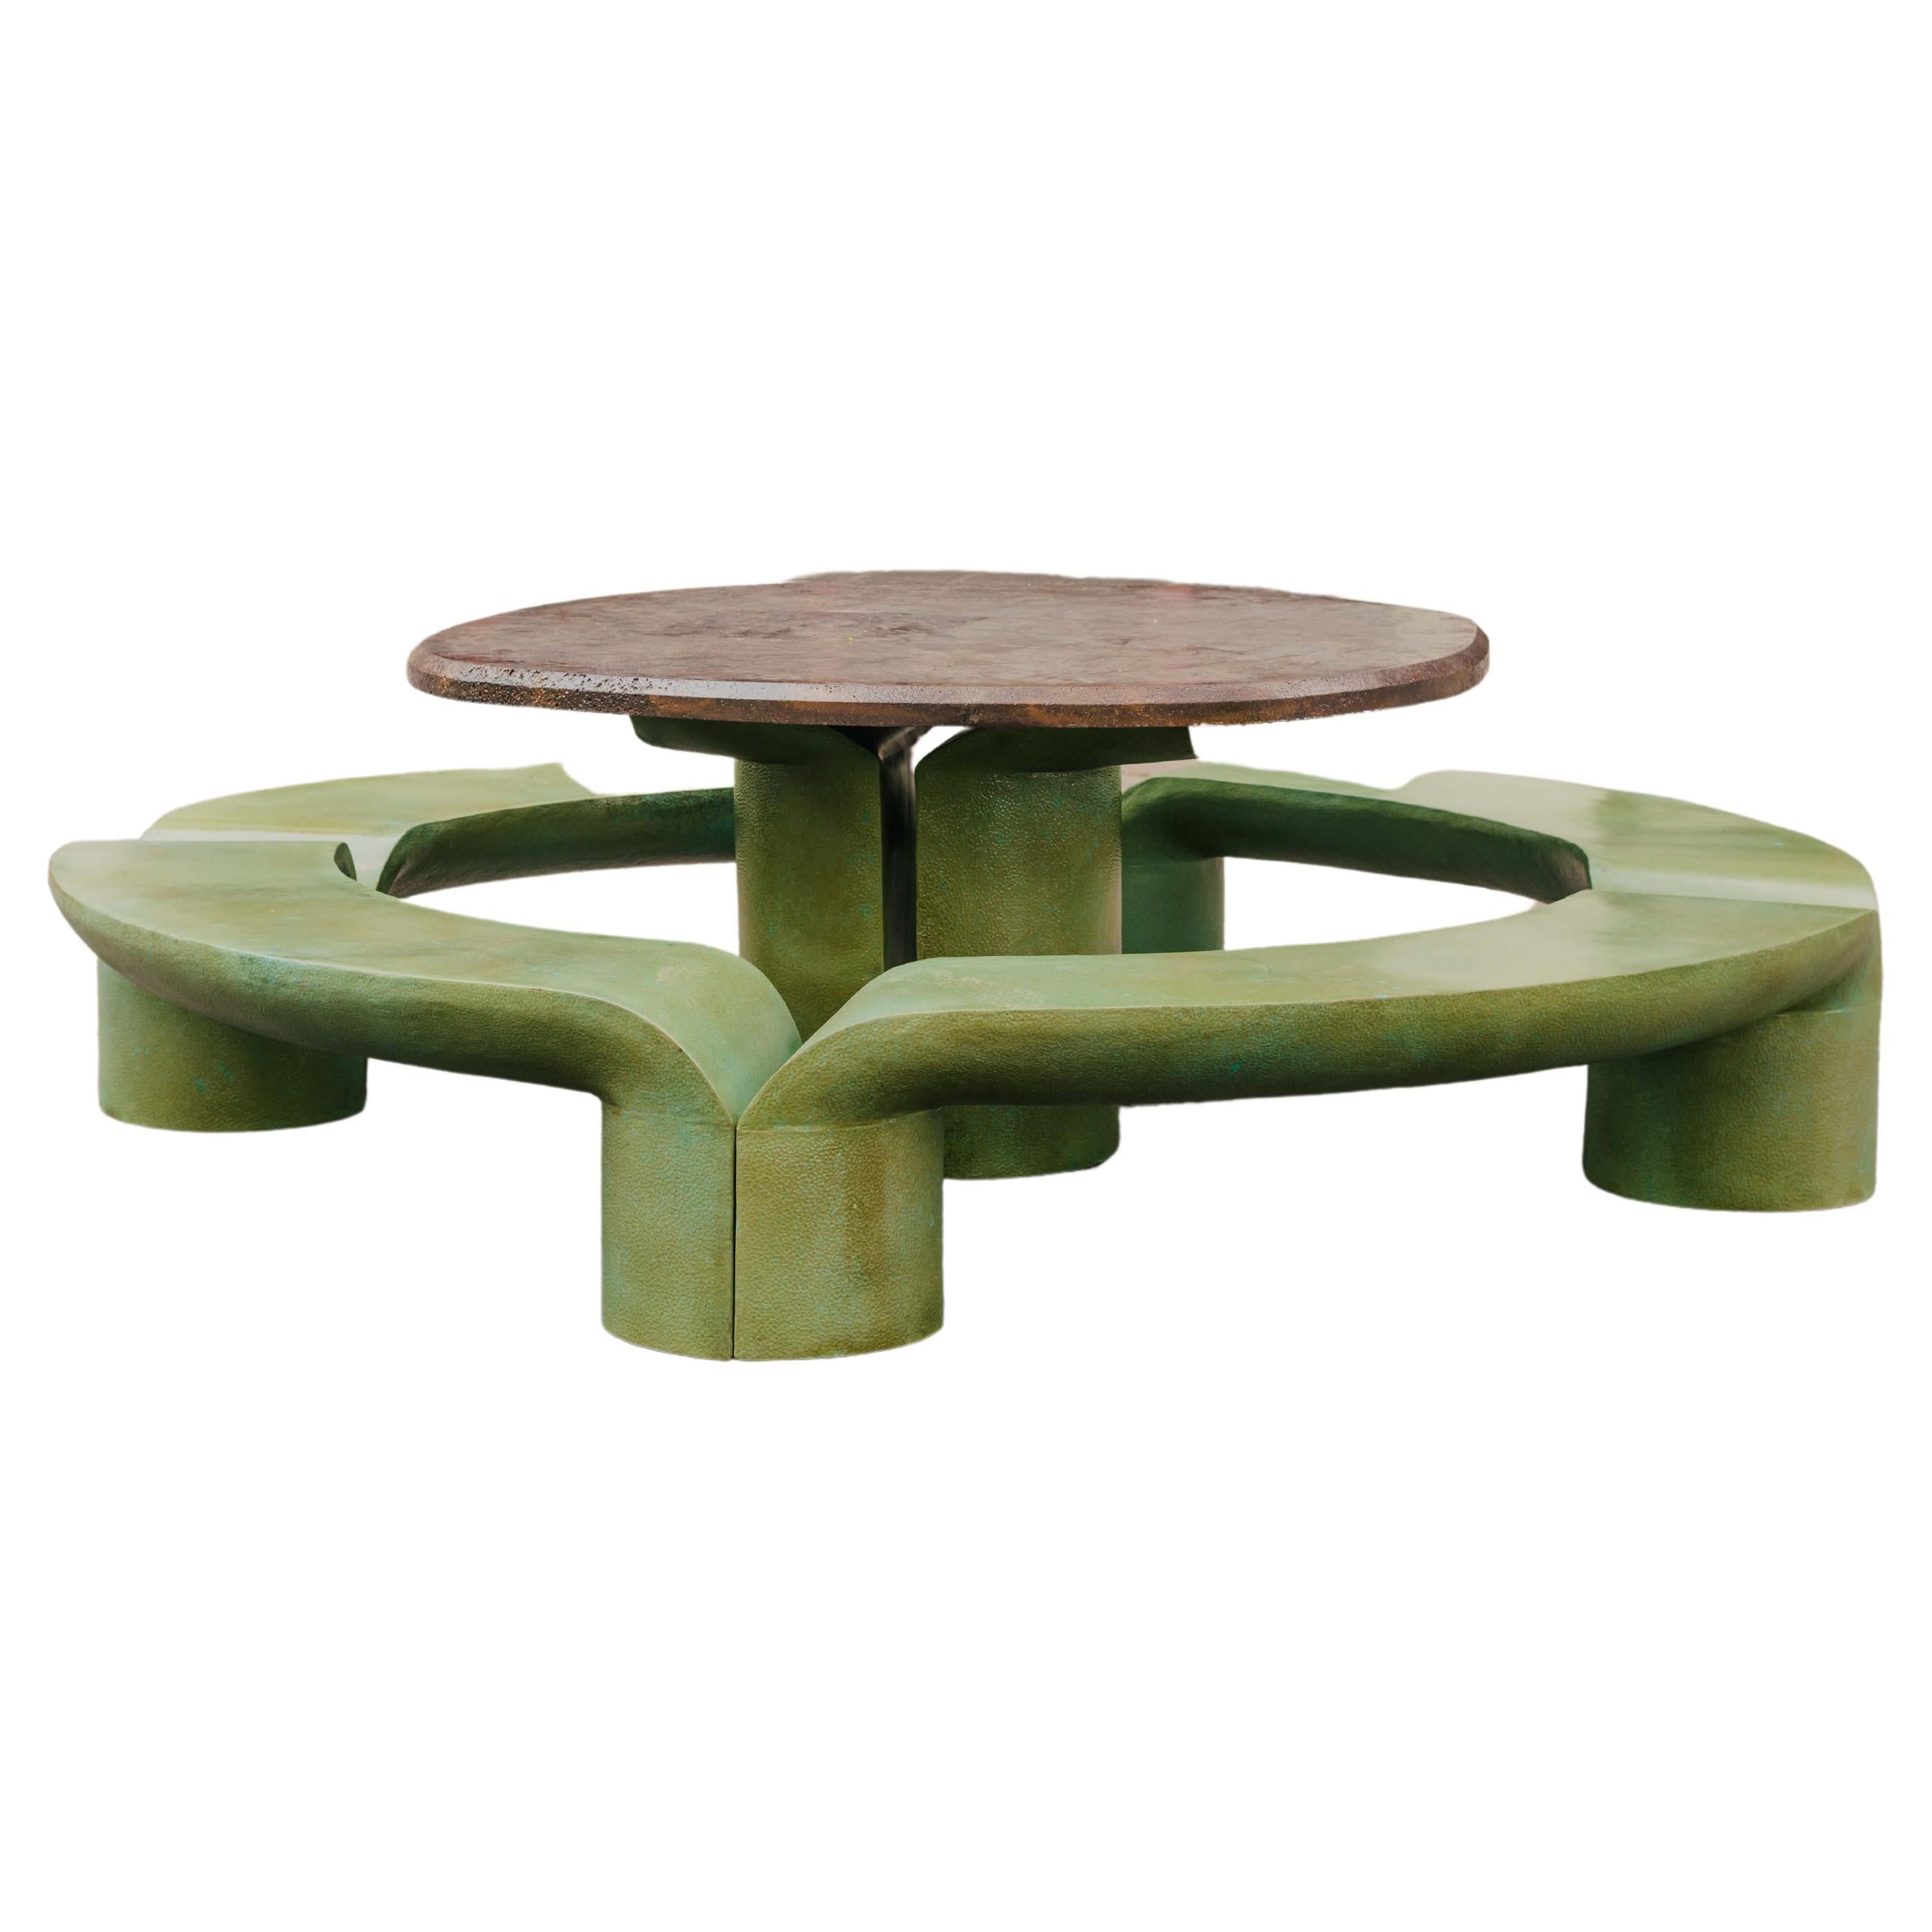 Oxidized Copper and Lava Stone Amaru Outdoor Table and Bench Set by Ian Felton